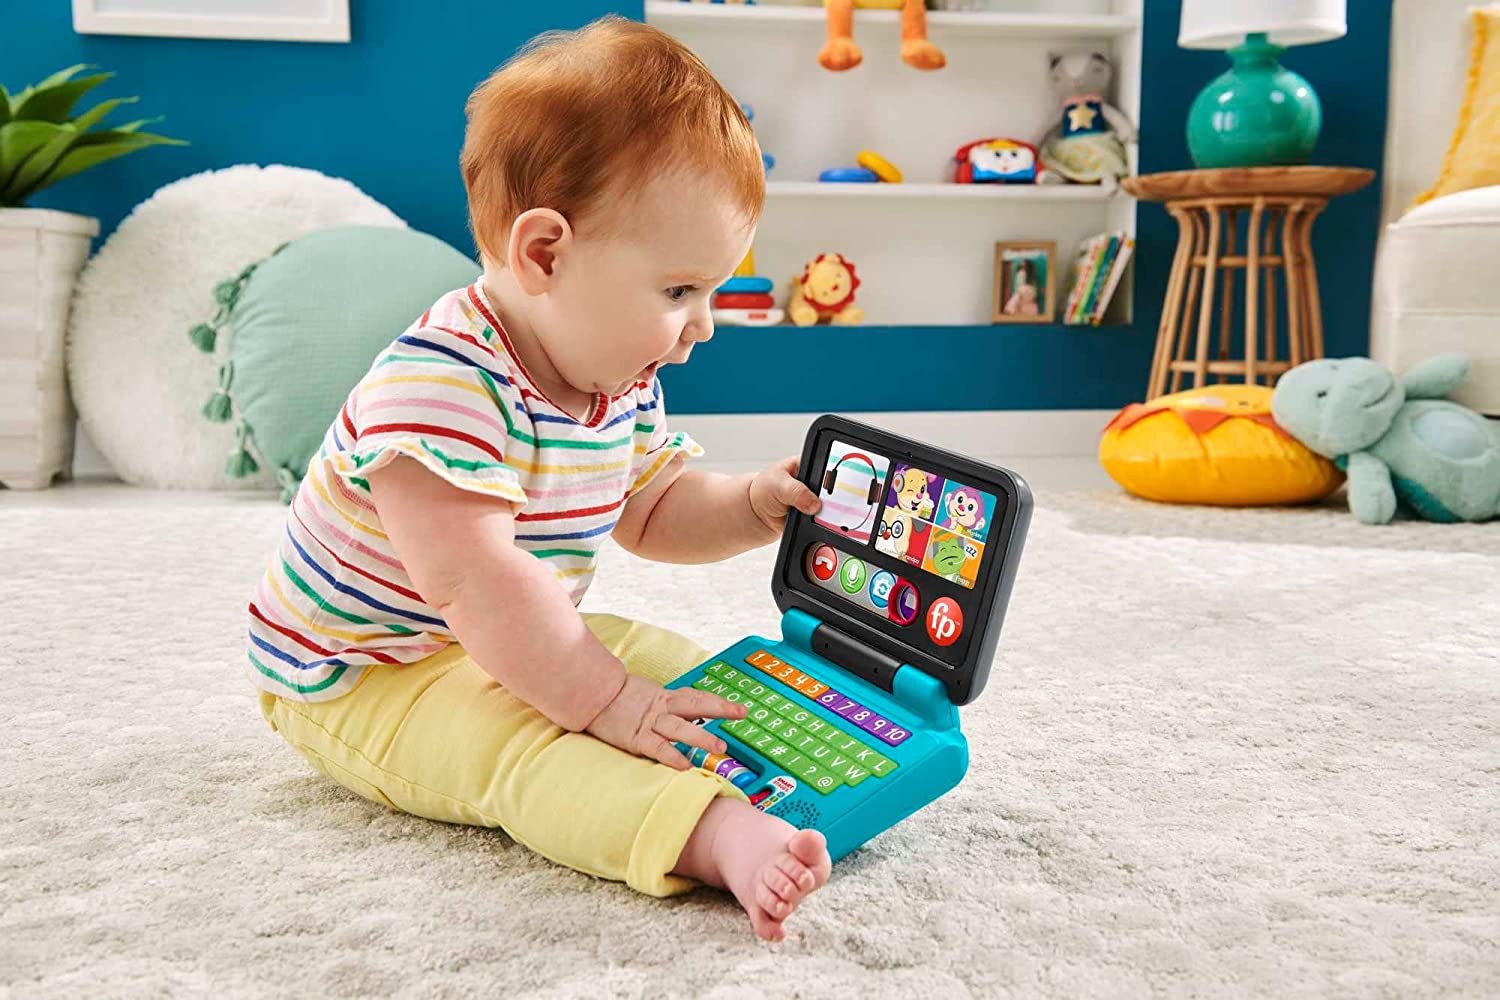 Fisher Price Laugh & Learn Laptop